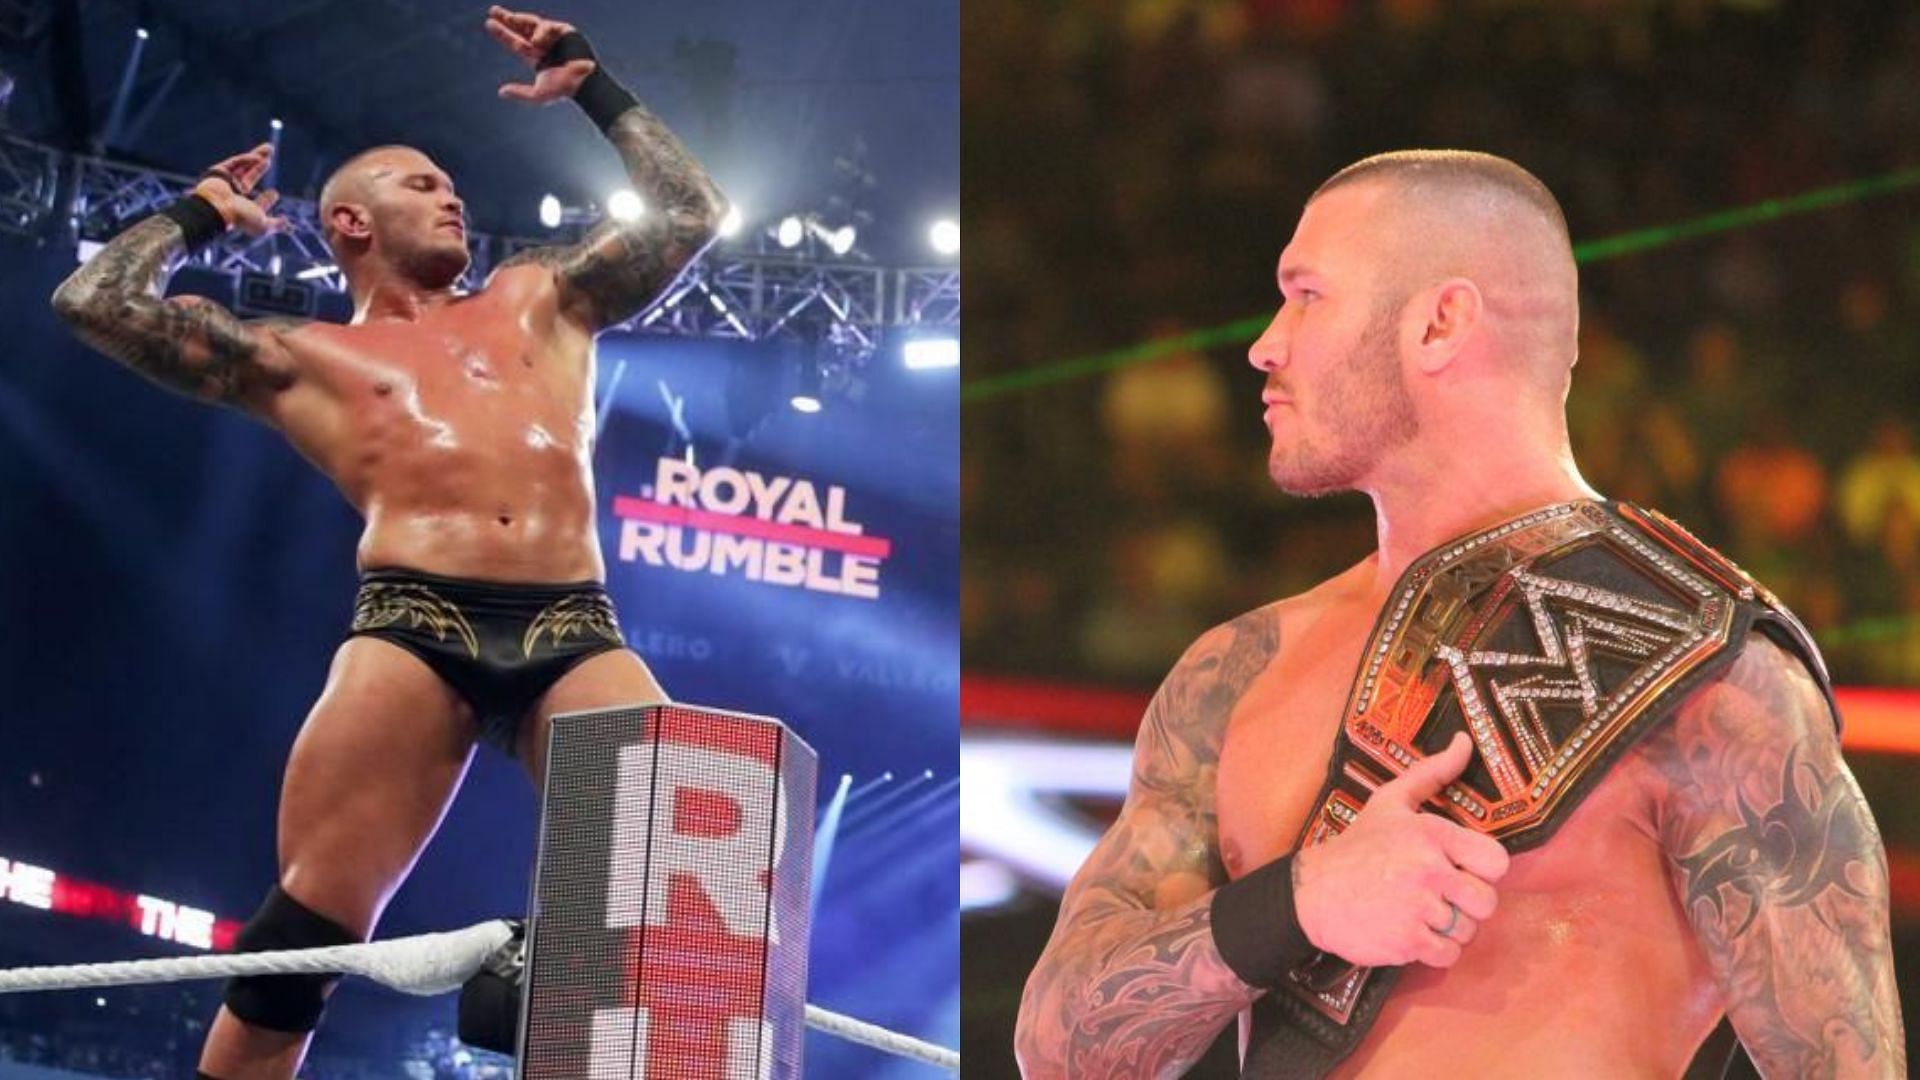 "He may not come back..." Wrestling world wants Randy Orton to make a